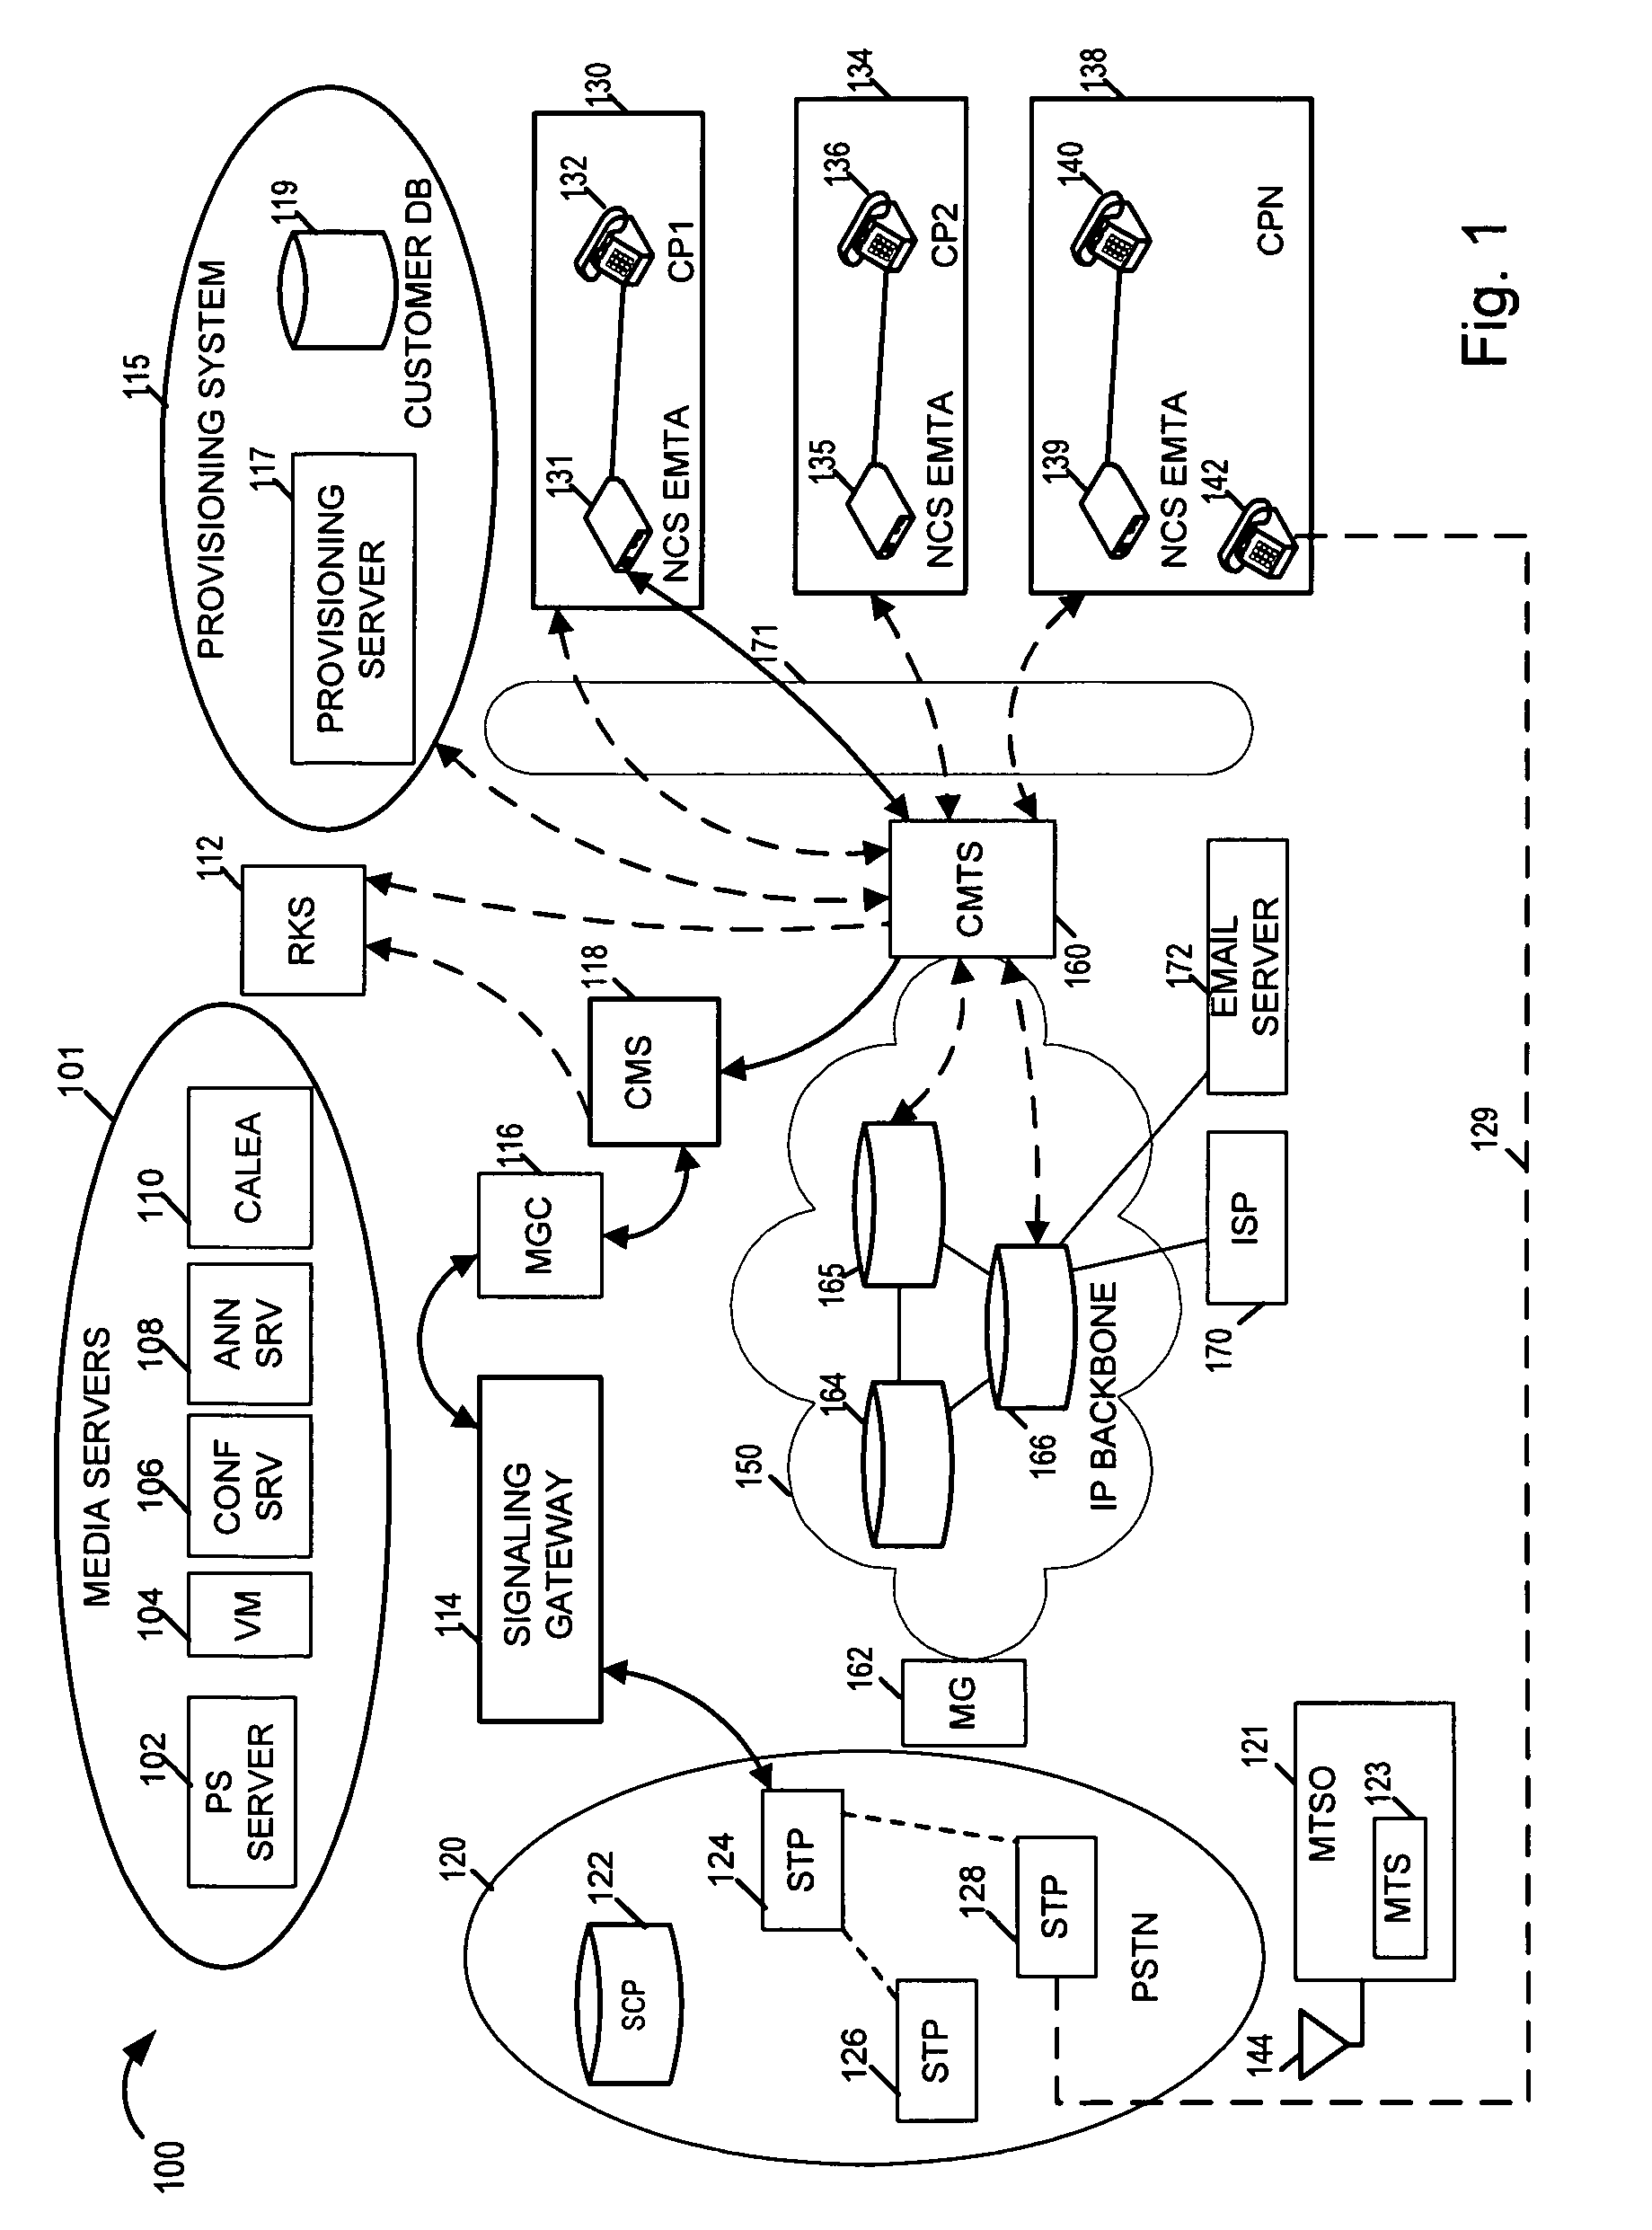 Methods and apparatus for providing multiple communications services with unified parental notification and/or control features